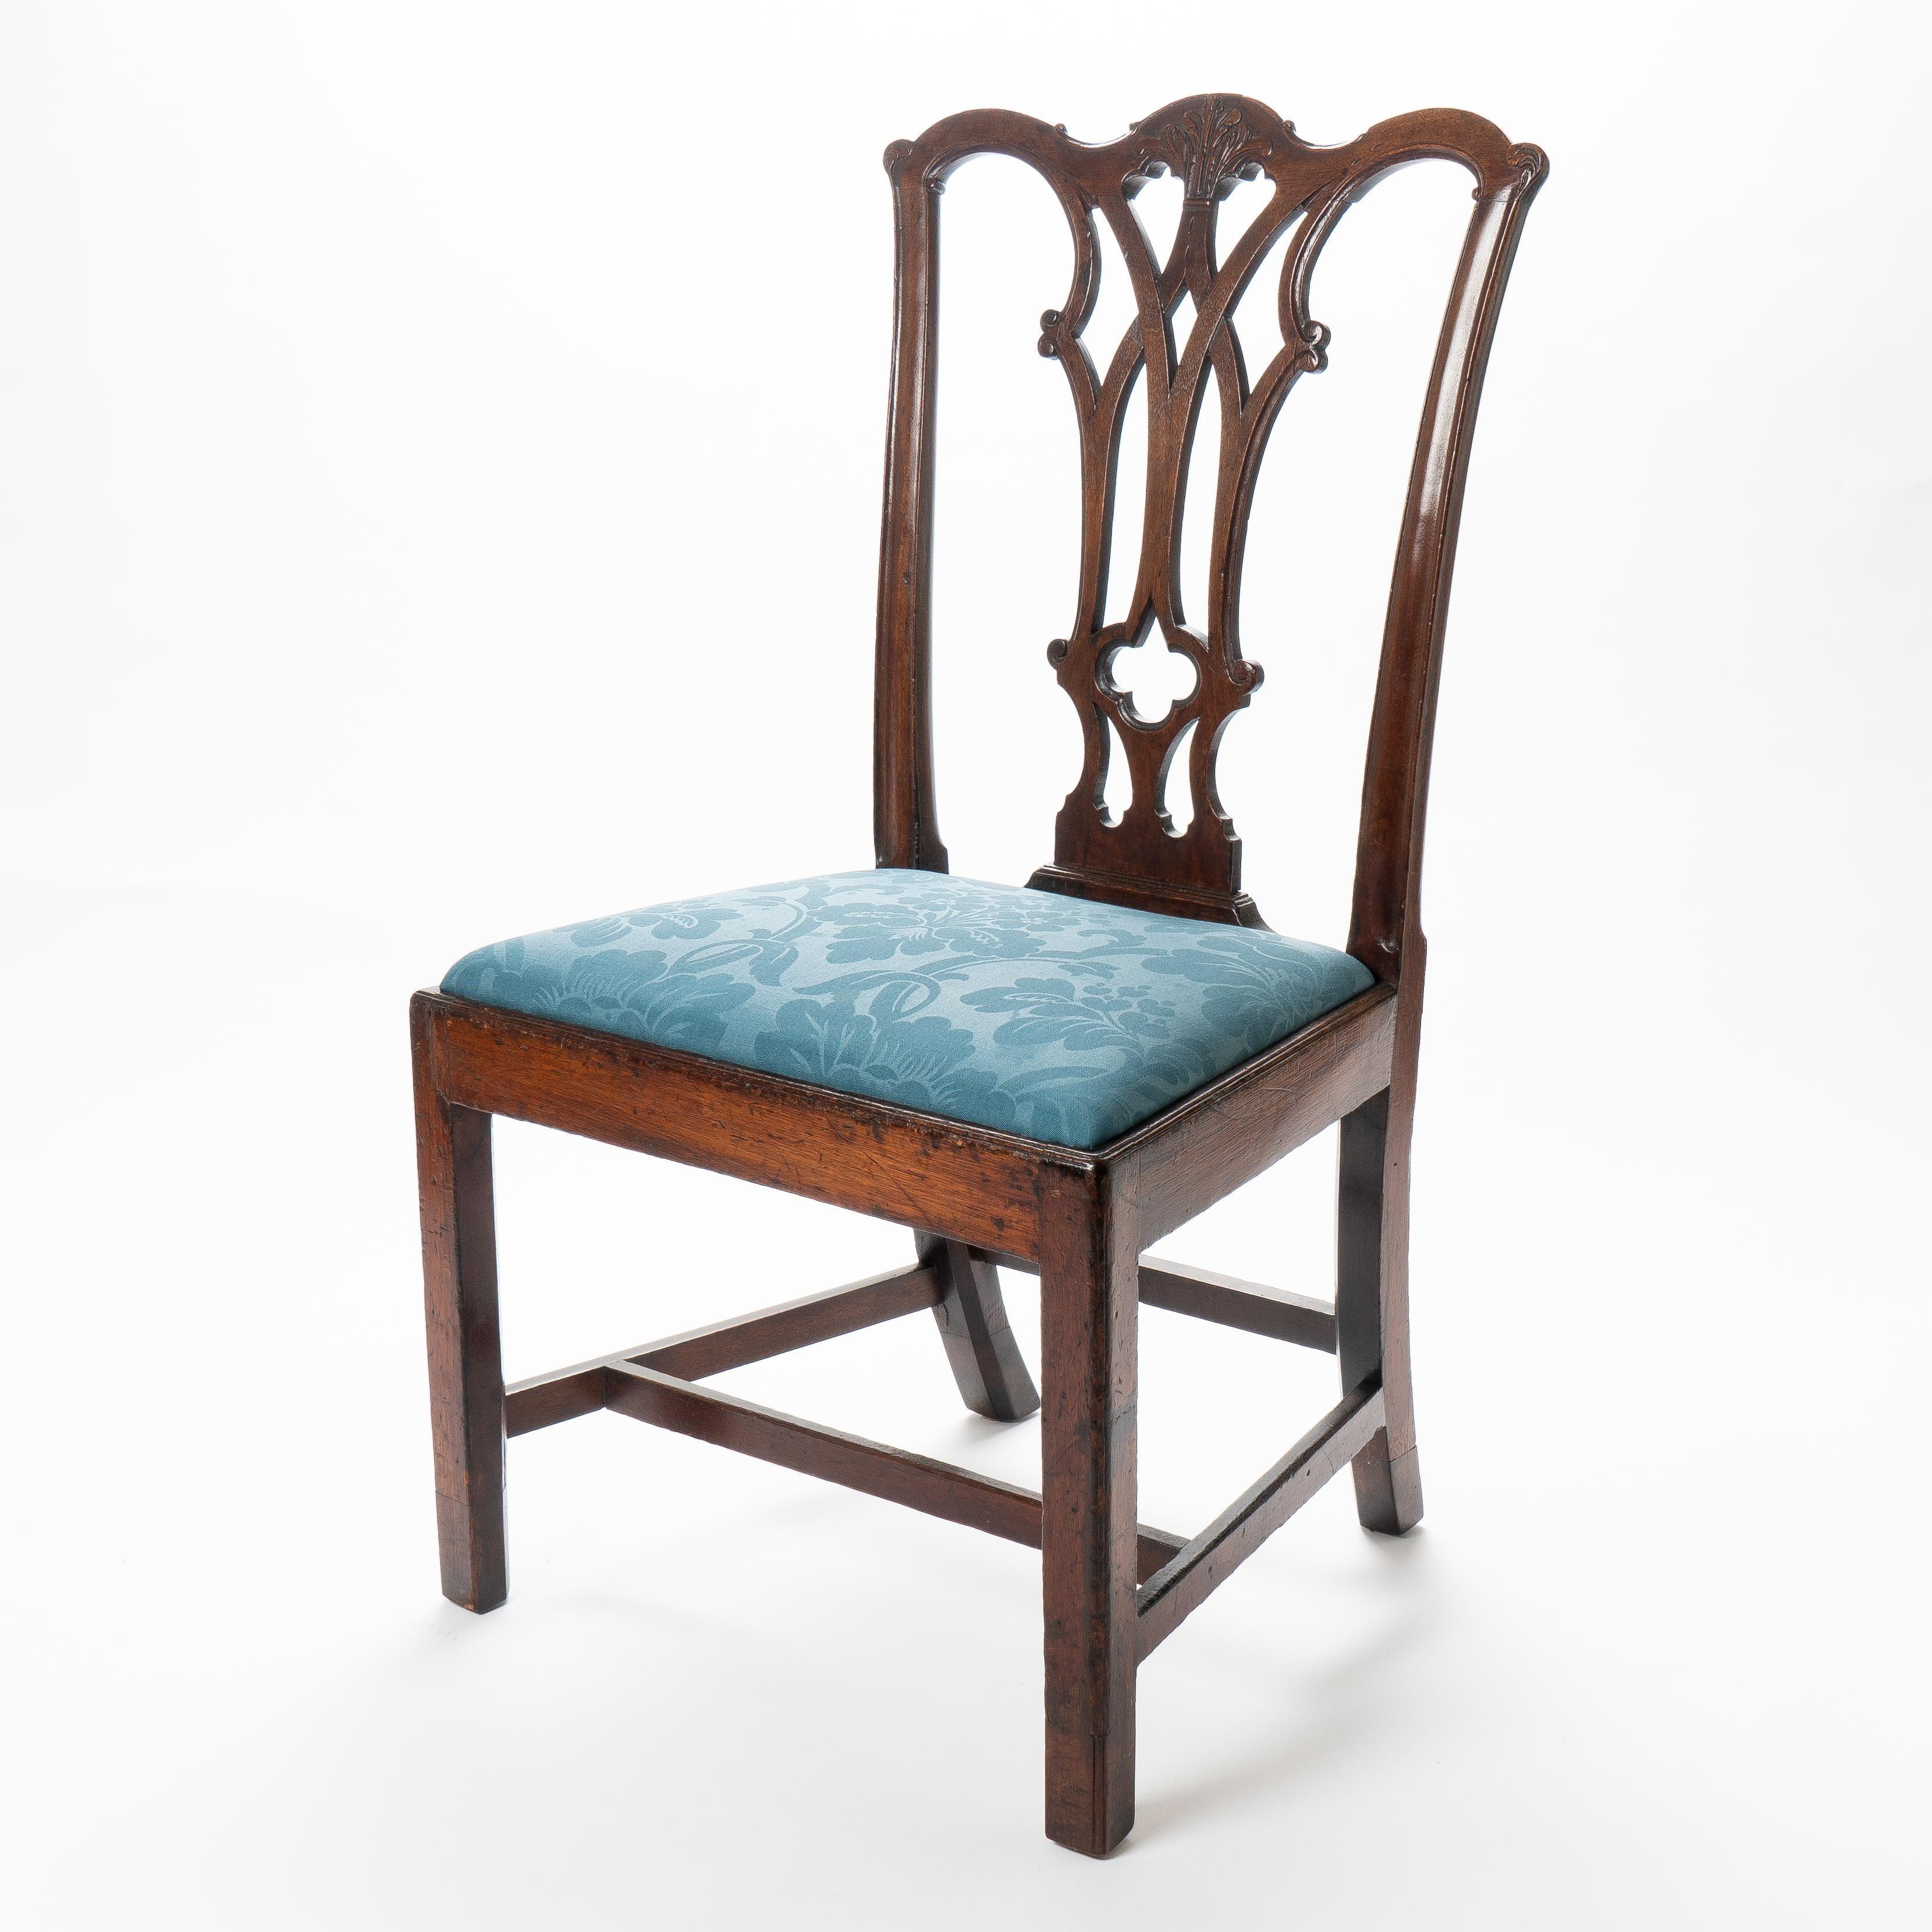 American Chippendale mahogany slip seat side chair by Thomas Tuft (1740–1788) with rococo carved detail on the center crest rail above a pierced back splat. The chair rests on square legs joined by an “H” stretcher, and the slip seat is upholstered